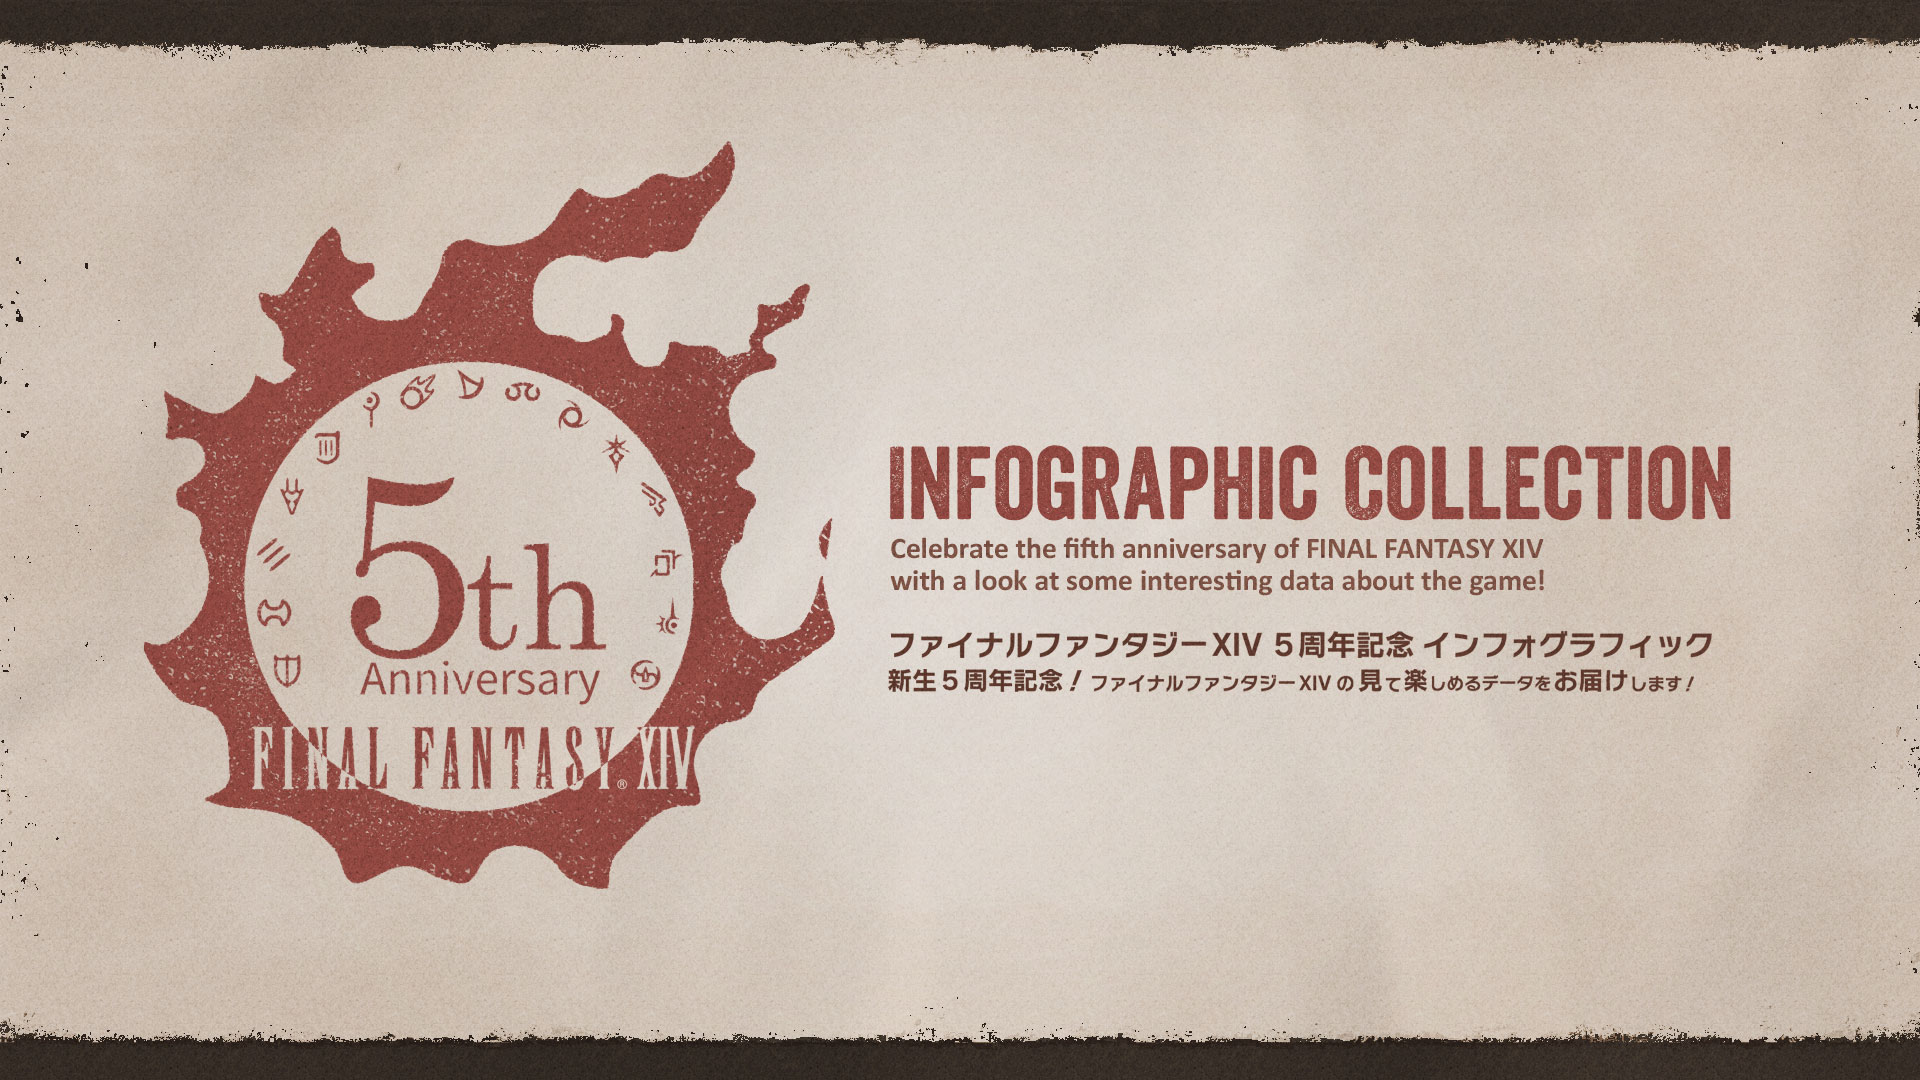 FINAL FANTASY XIV 5th Anniversary Infographic Collection